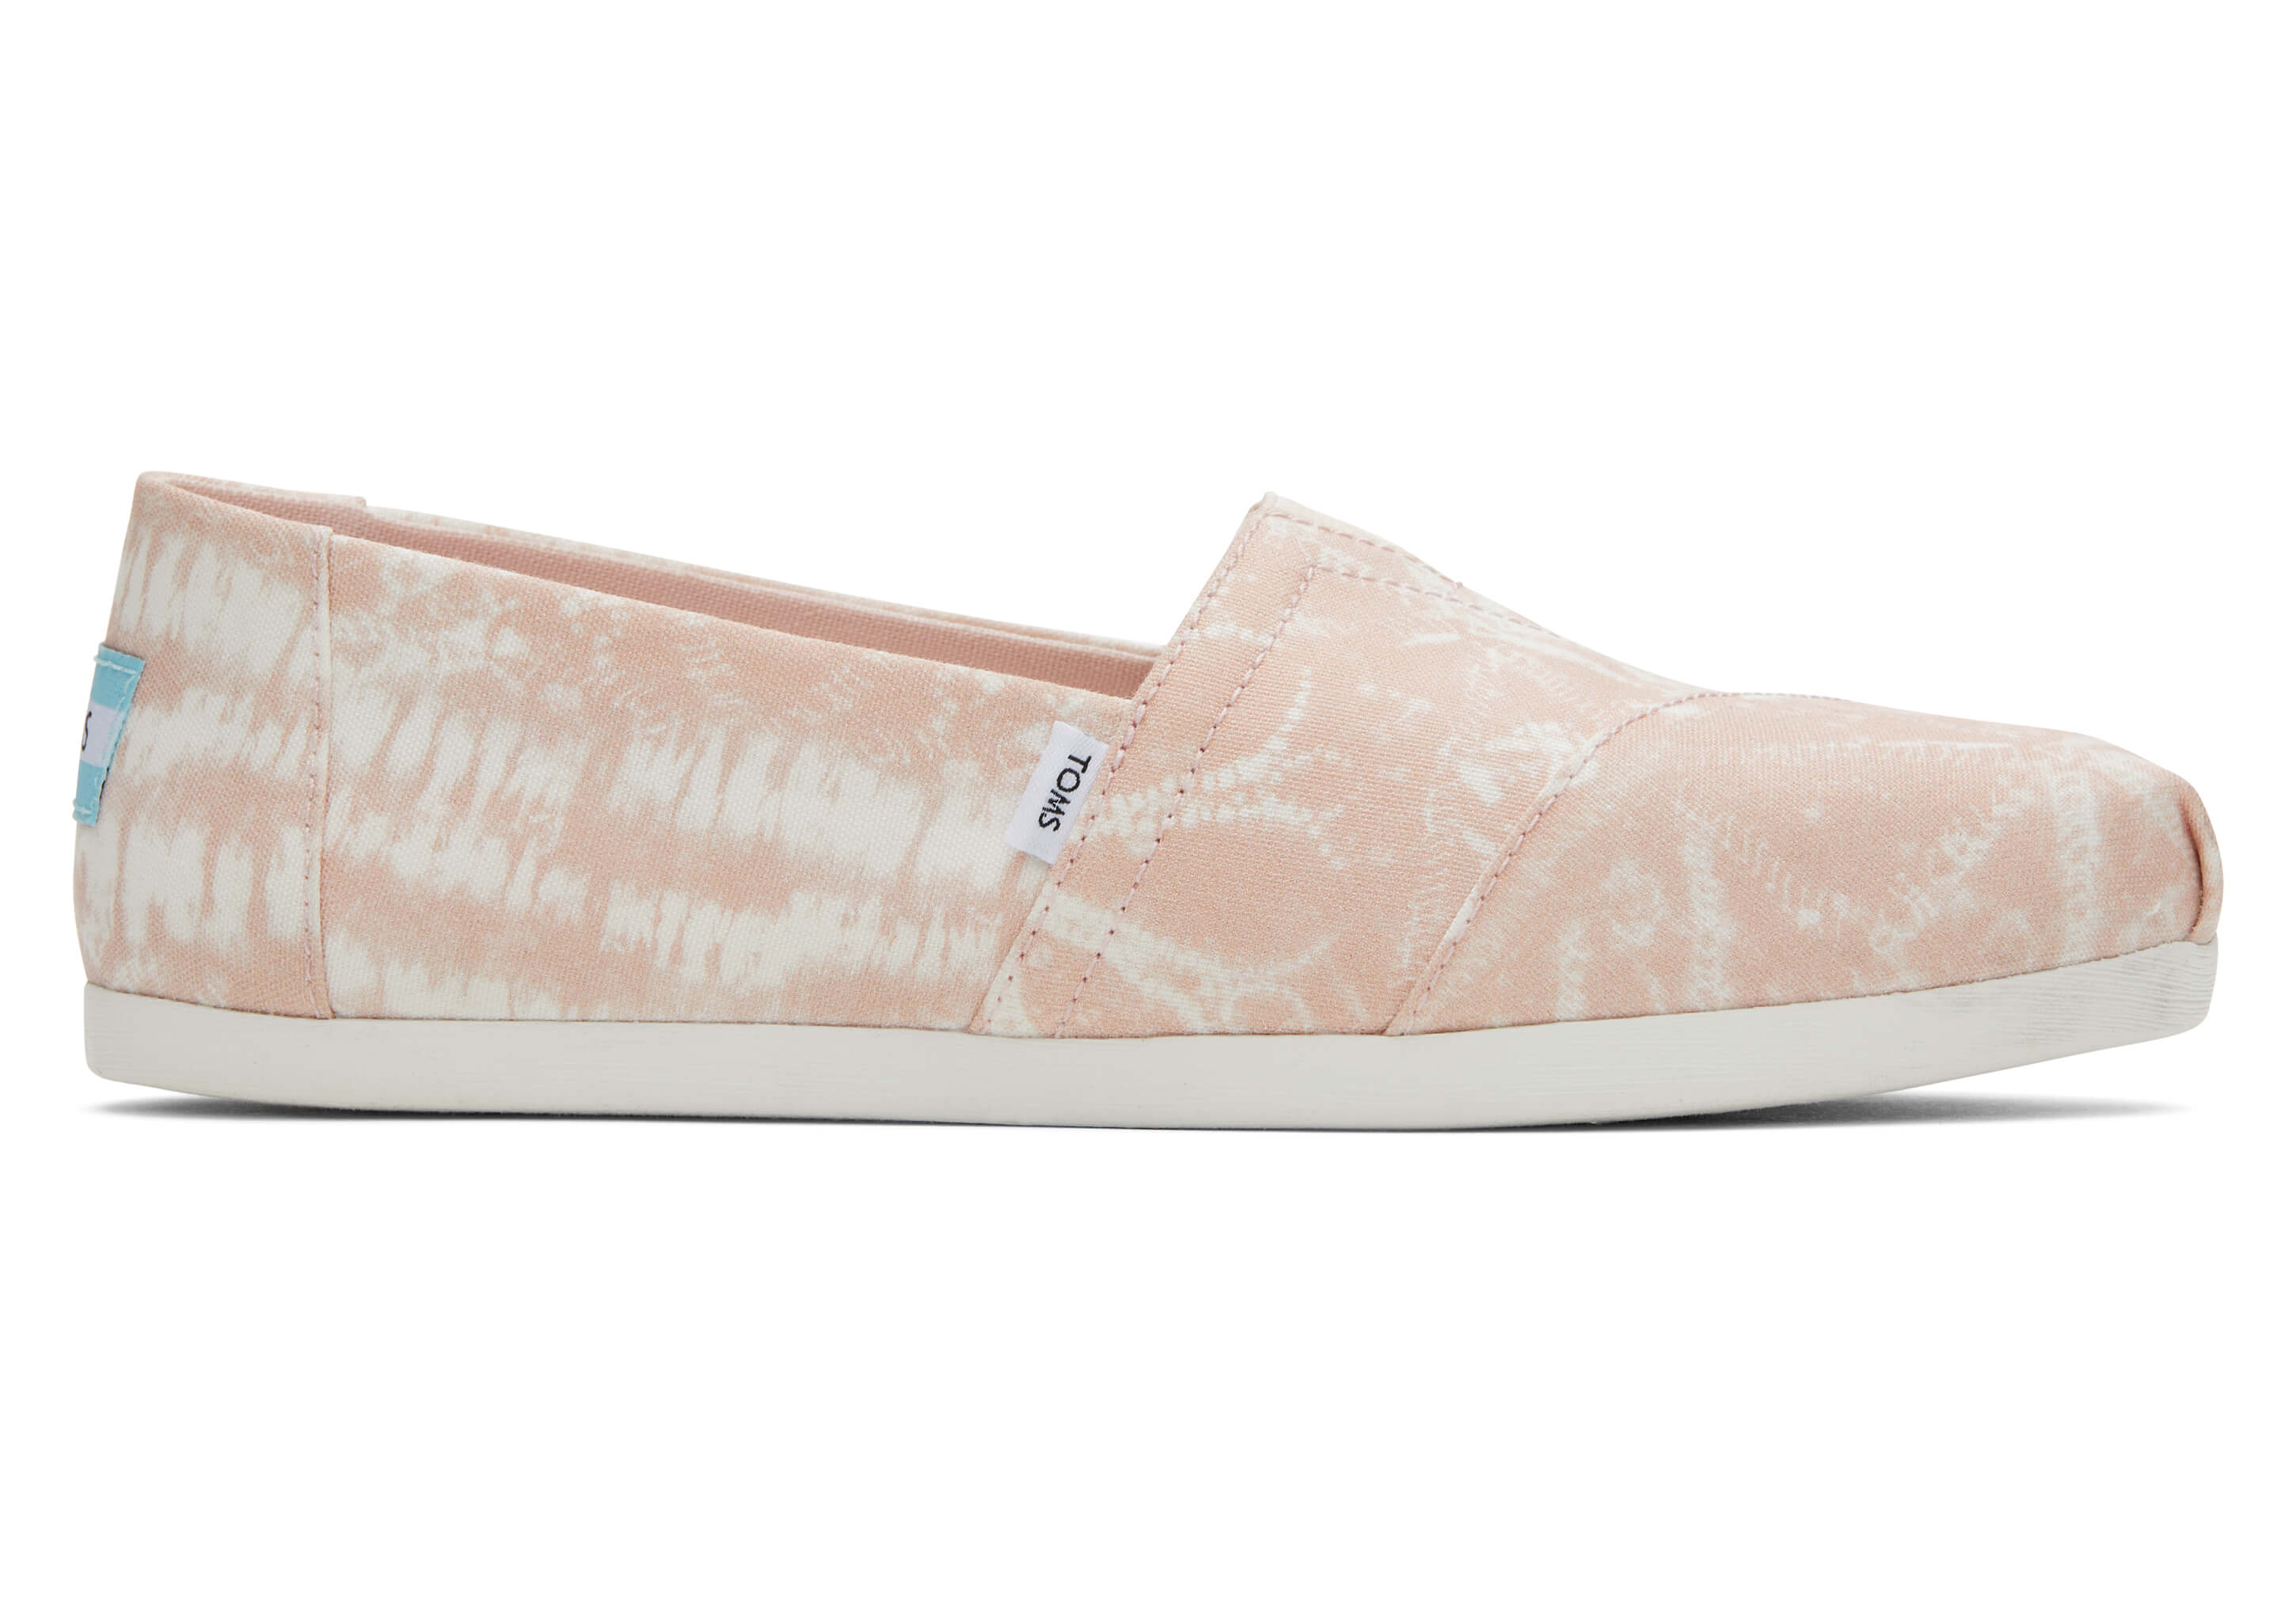 Toms shoes extra 25% off and free shipping